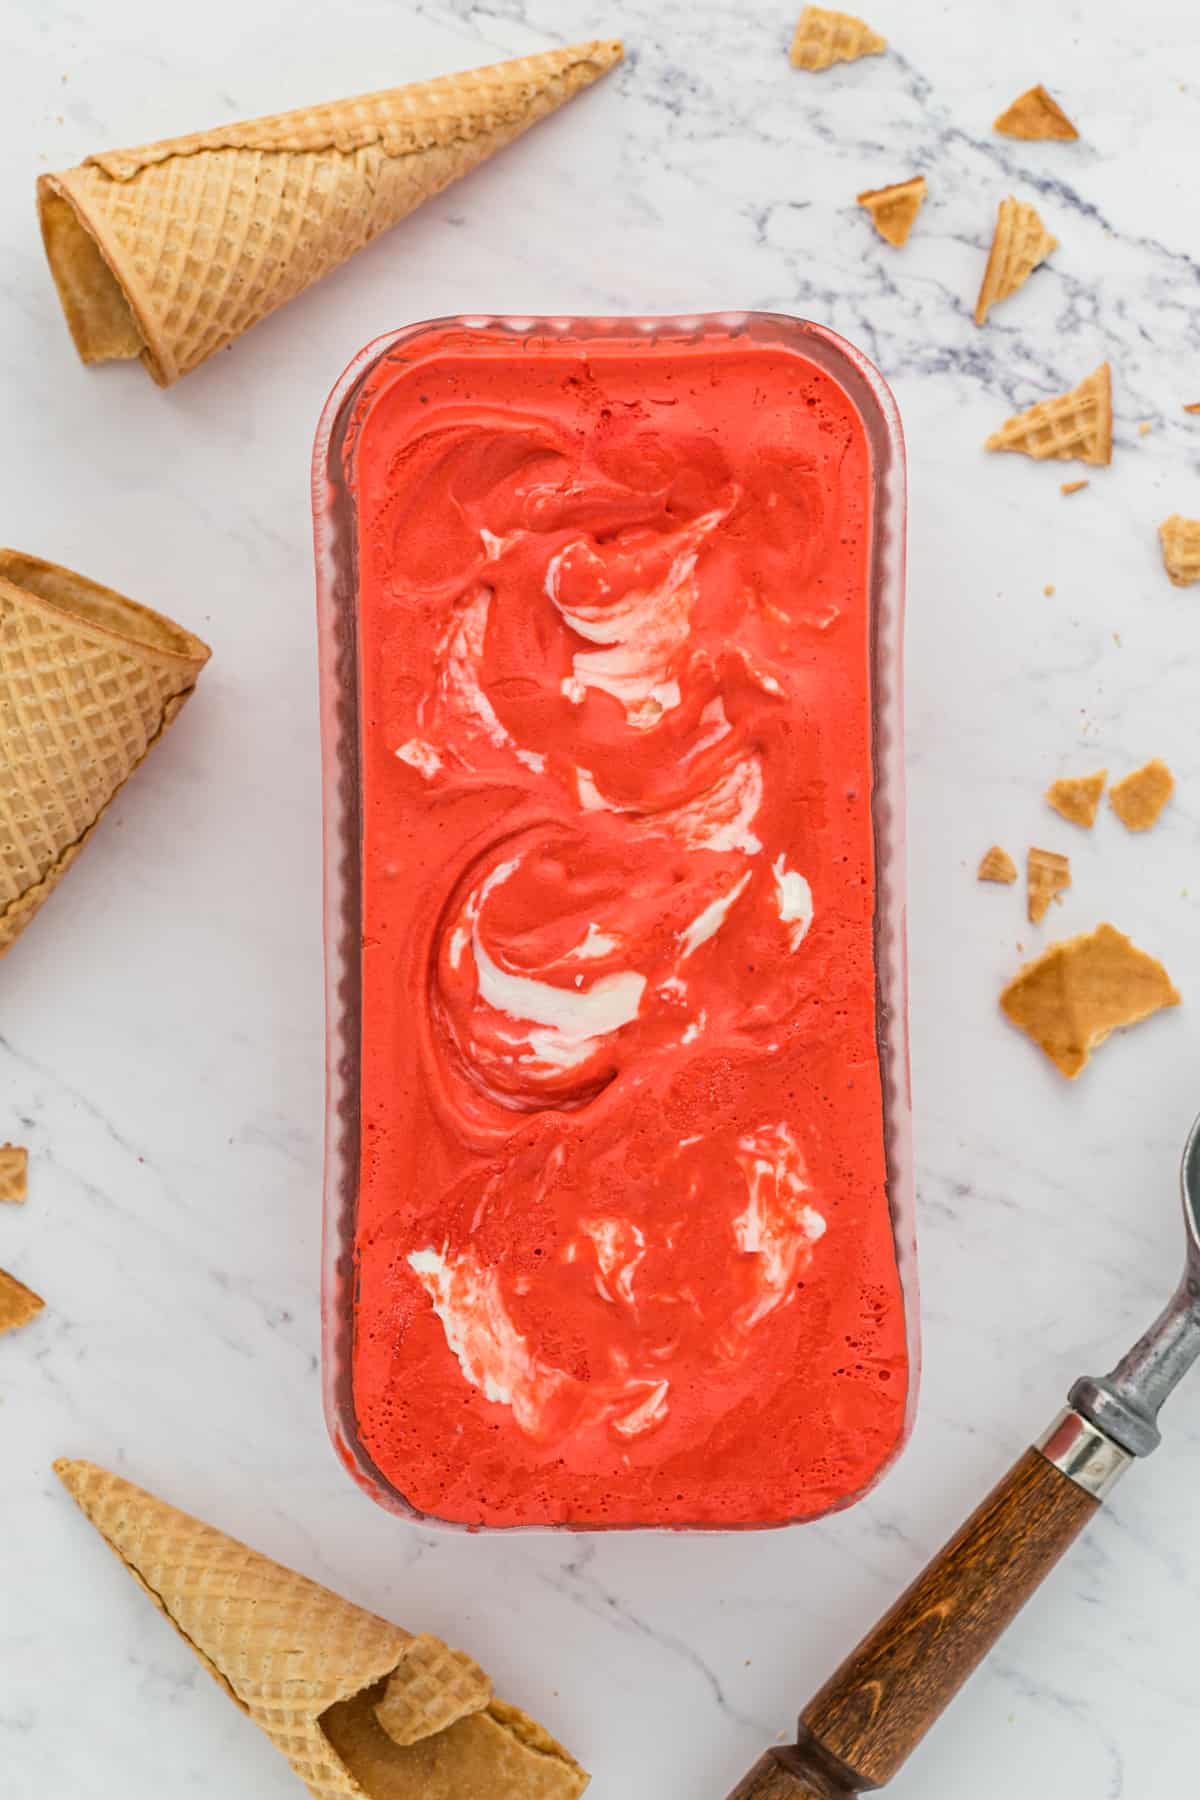 Red colored ice cream in a container after freezing